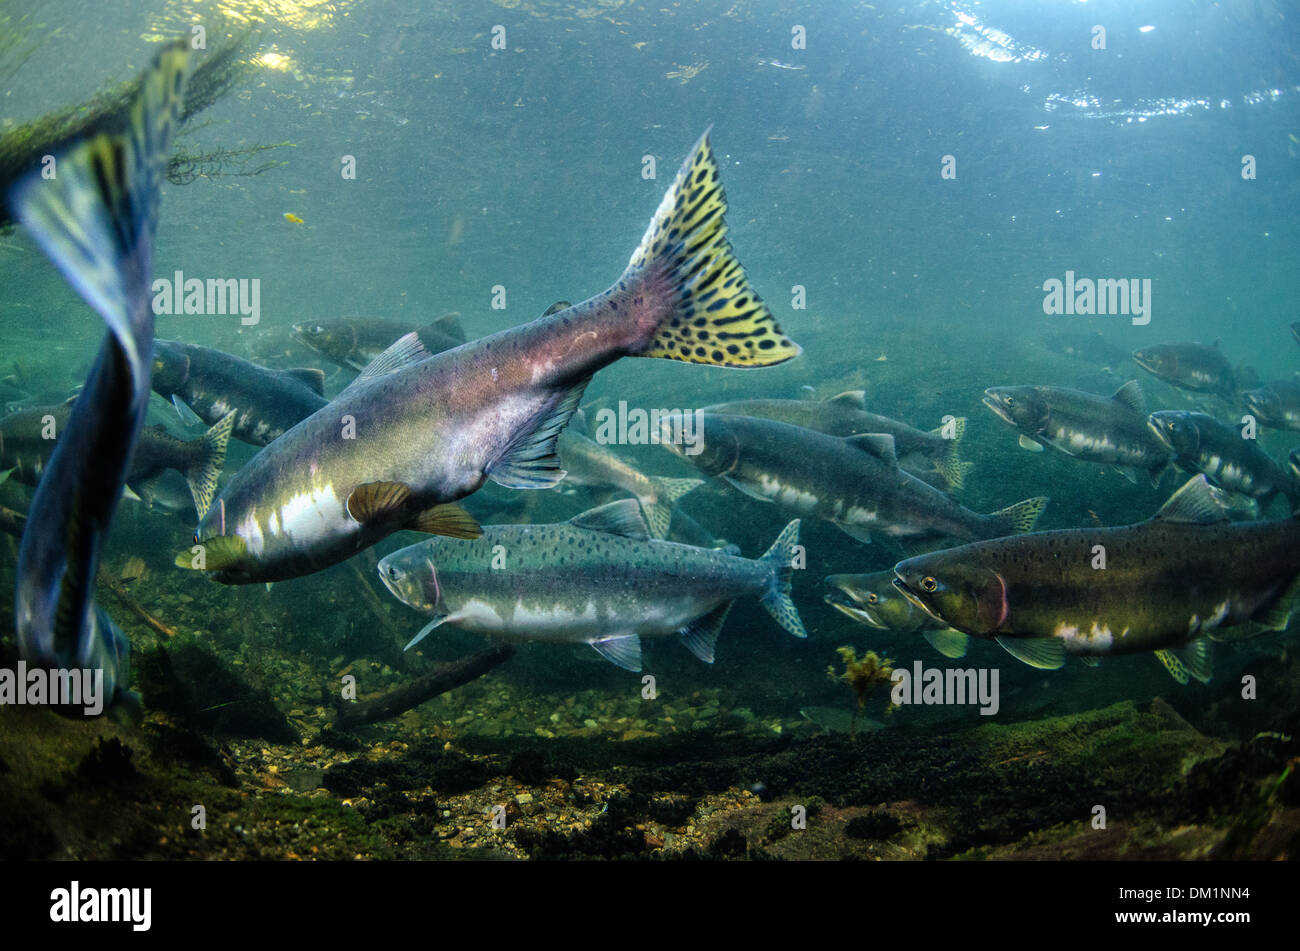 Pink salmon Oncorhynchus gorbuscha in an alaska river showing their tails and spots Stock Photo